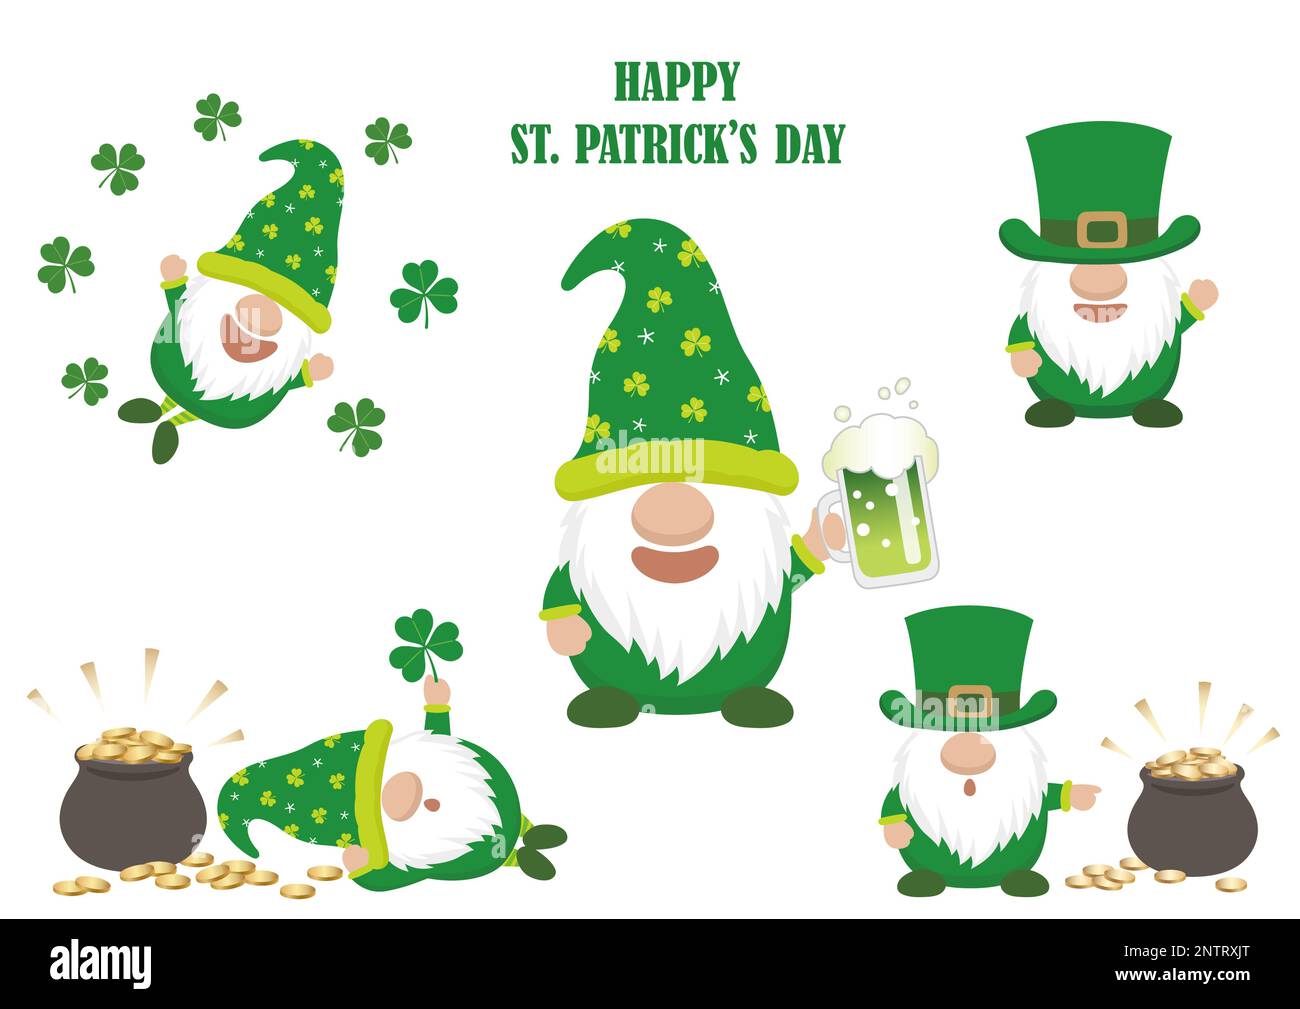 St. Patrick’s Day Vector Symbol Character Illustration Set Isolated On A White Background. Stock Vector